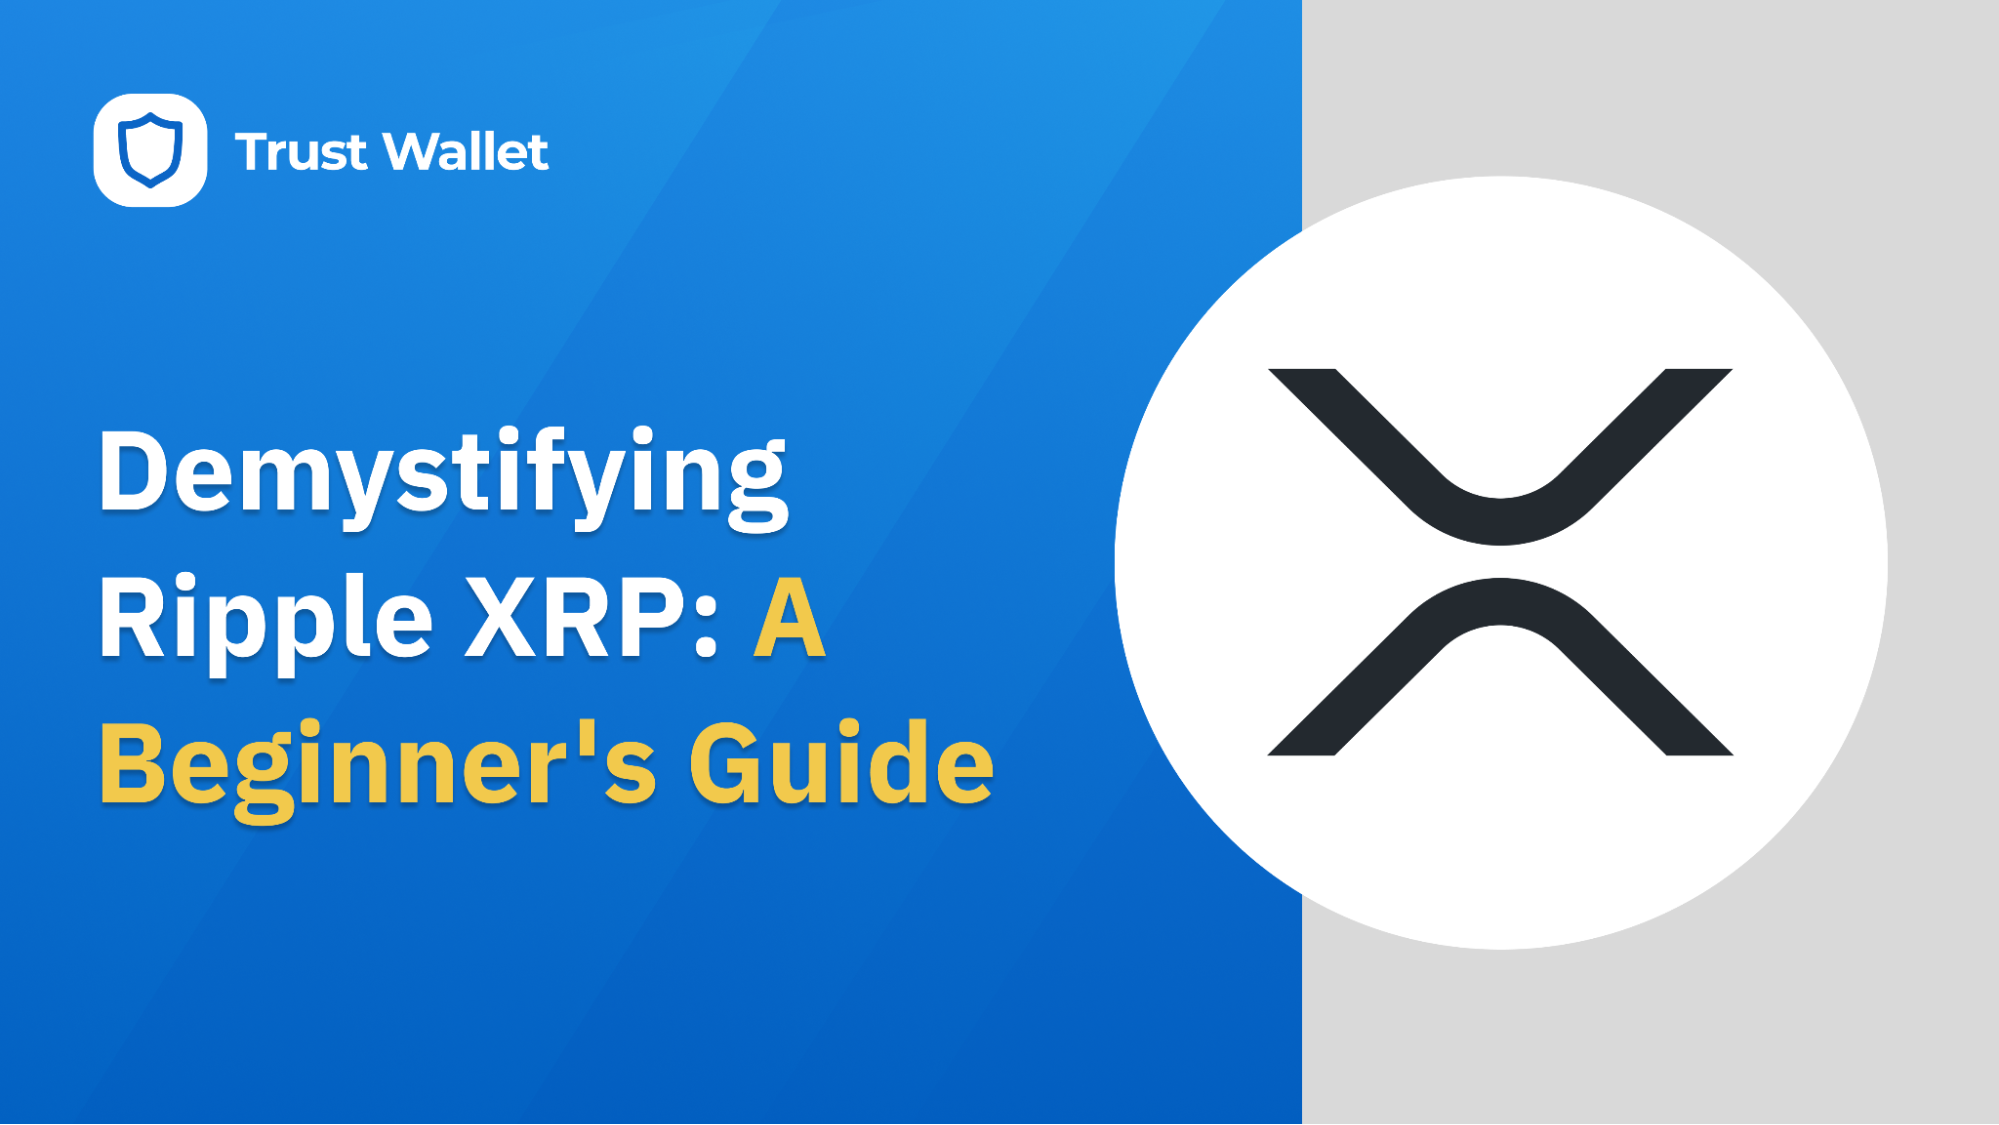 Demystifying Ripple XRP: A Beginner's Guide